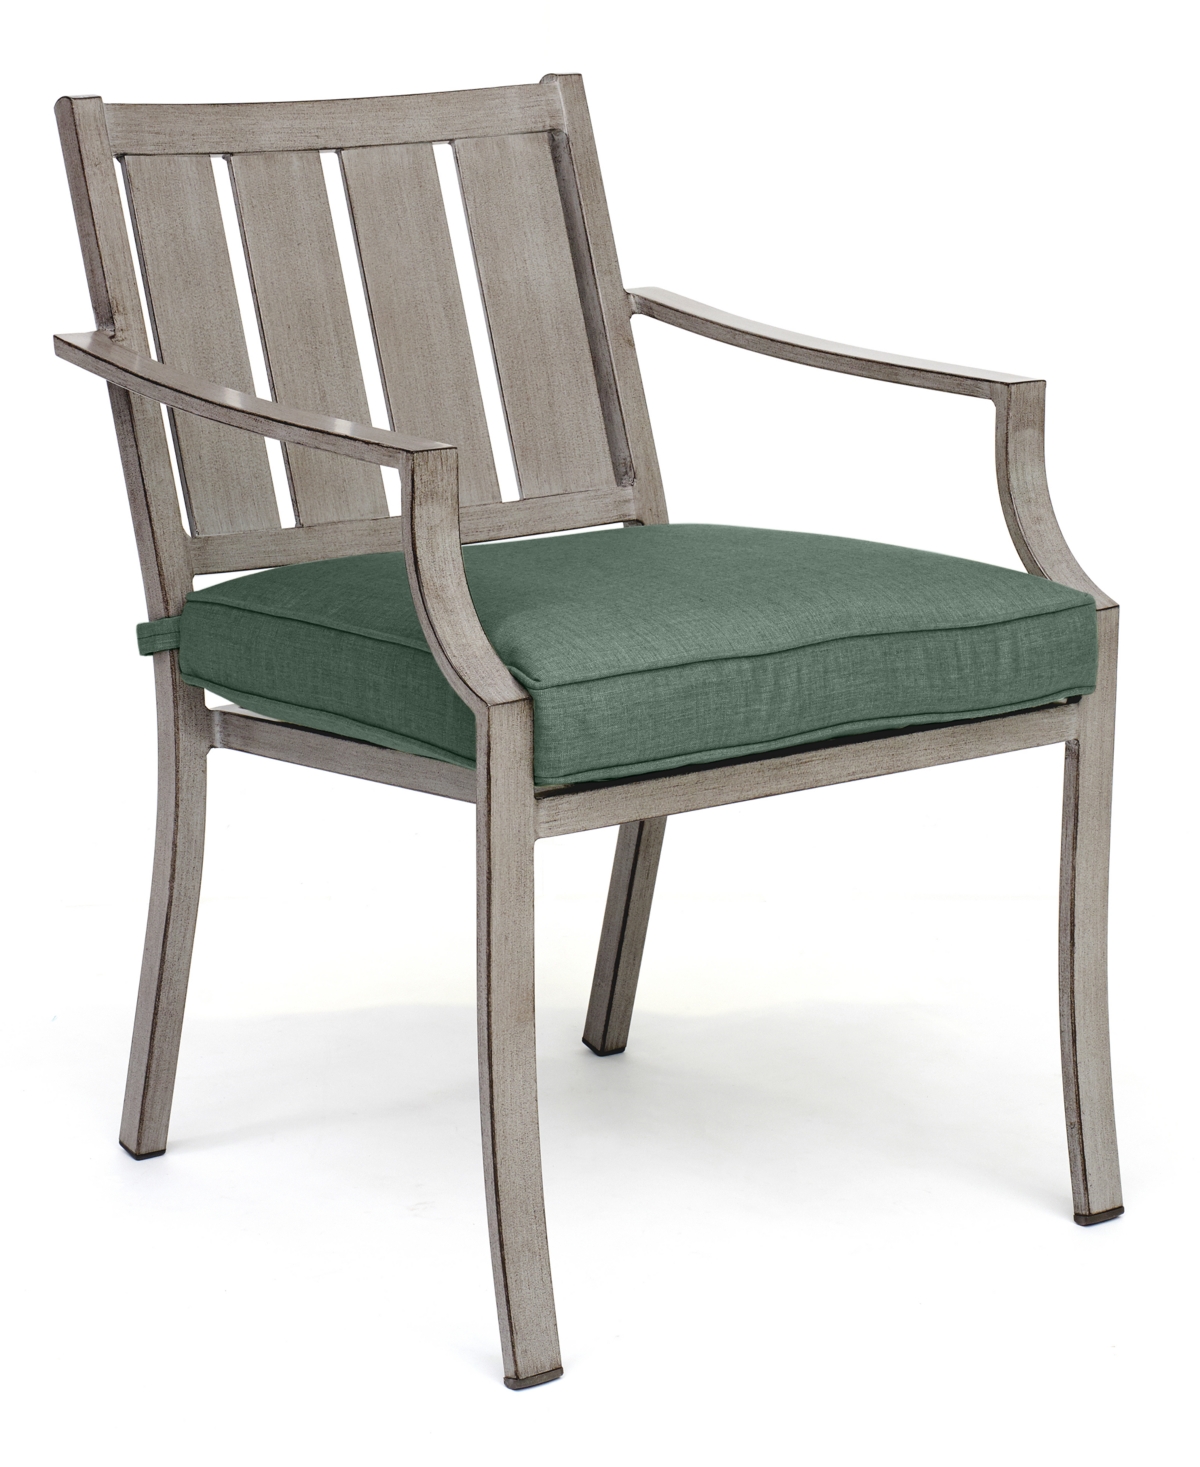 Agio Wayland Outdoor Dining Chair, Created For Macy's In Outdura Grasshopper